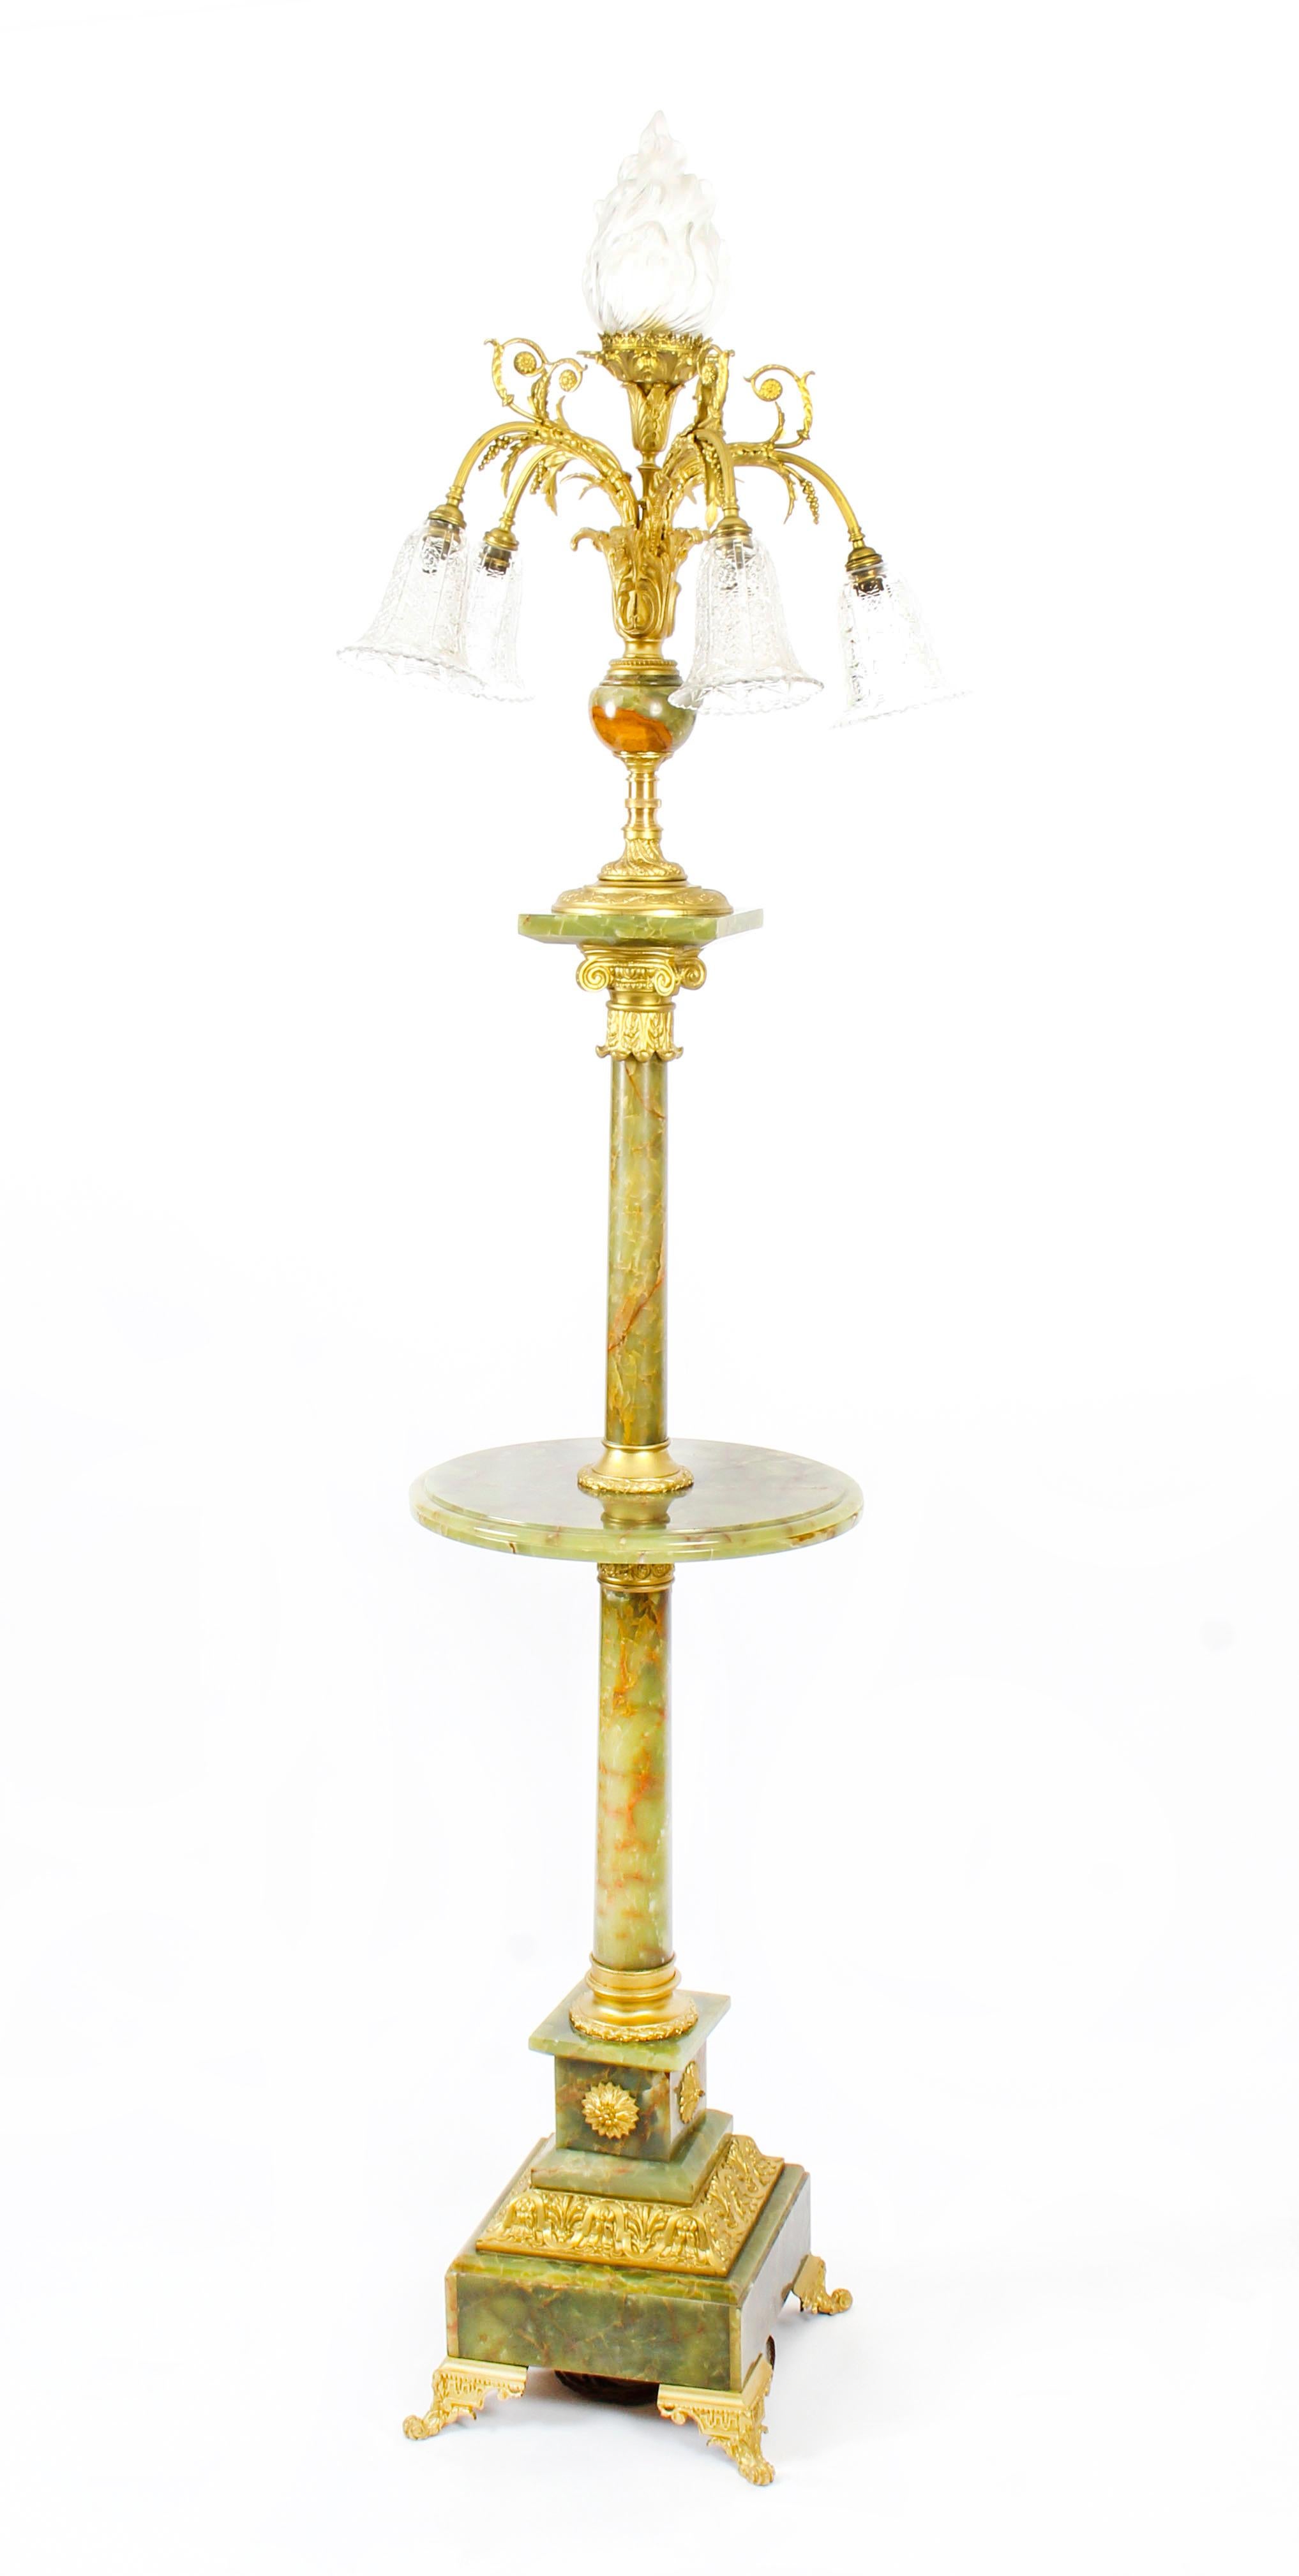 This is a truly stunning antique onyx and ormolu Louis XVI Revival floor standard lamp, circa 1900 in date.
 
This exceptional lamp features a stunning flaming torch at the top surrounded by five further exquisite branches with beautiful cut glass